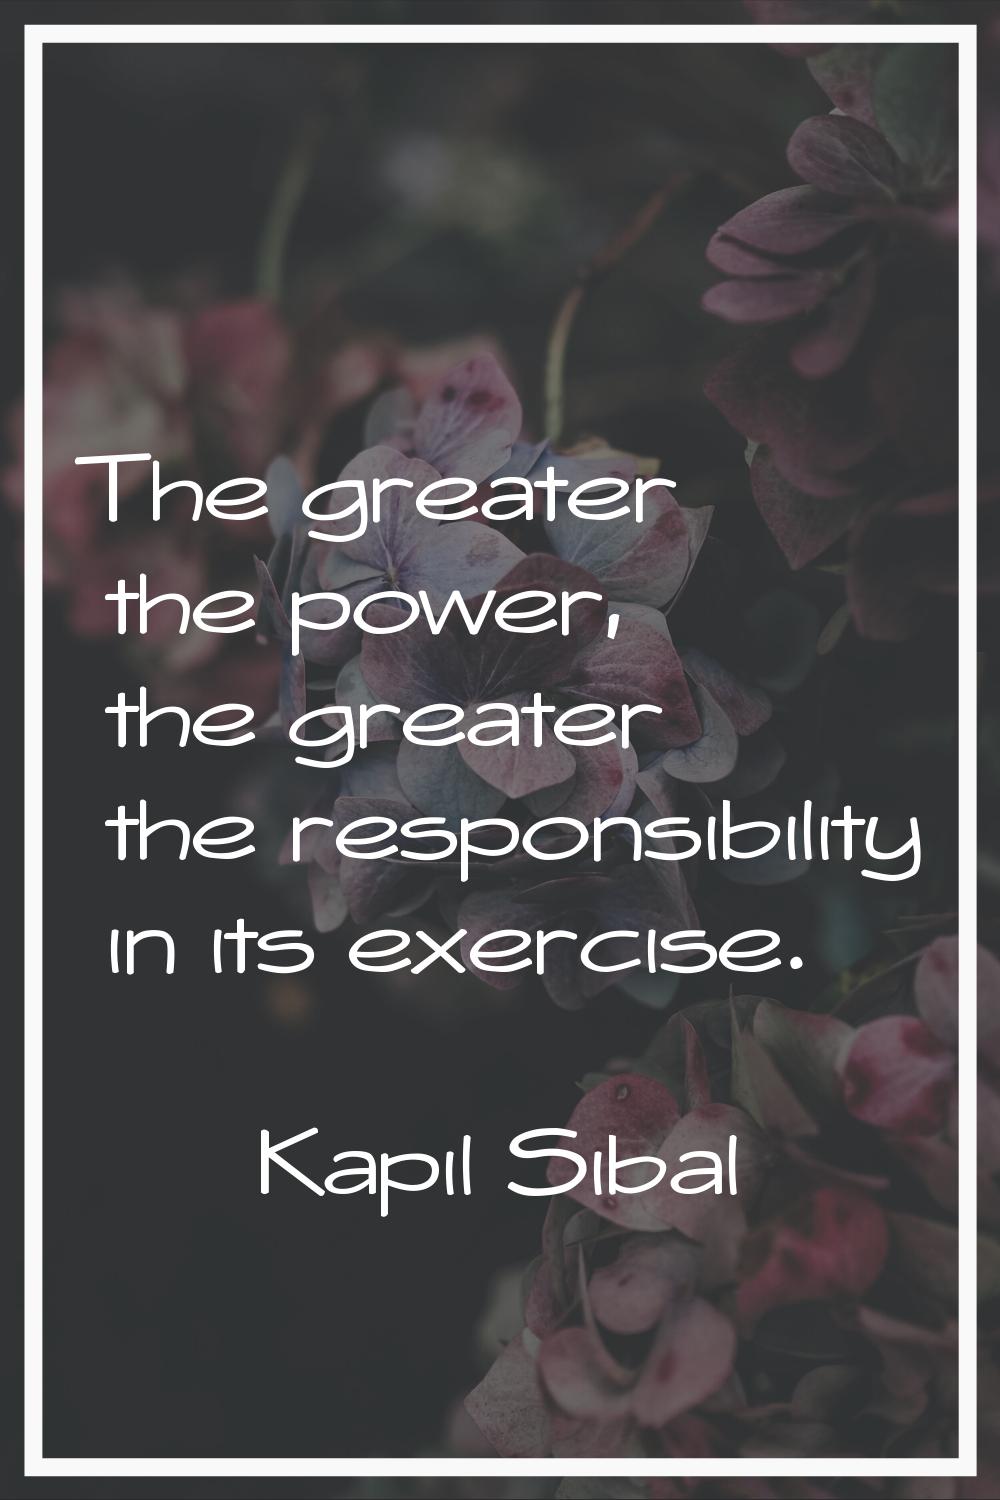 The greater the power, the greater the responsibility in its exercise.